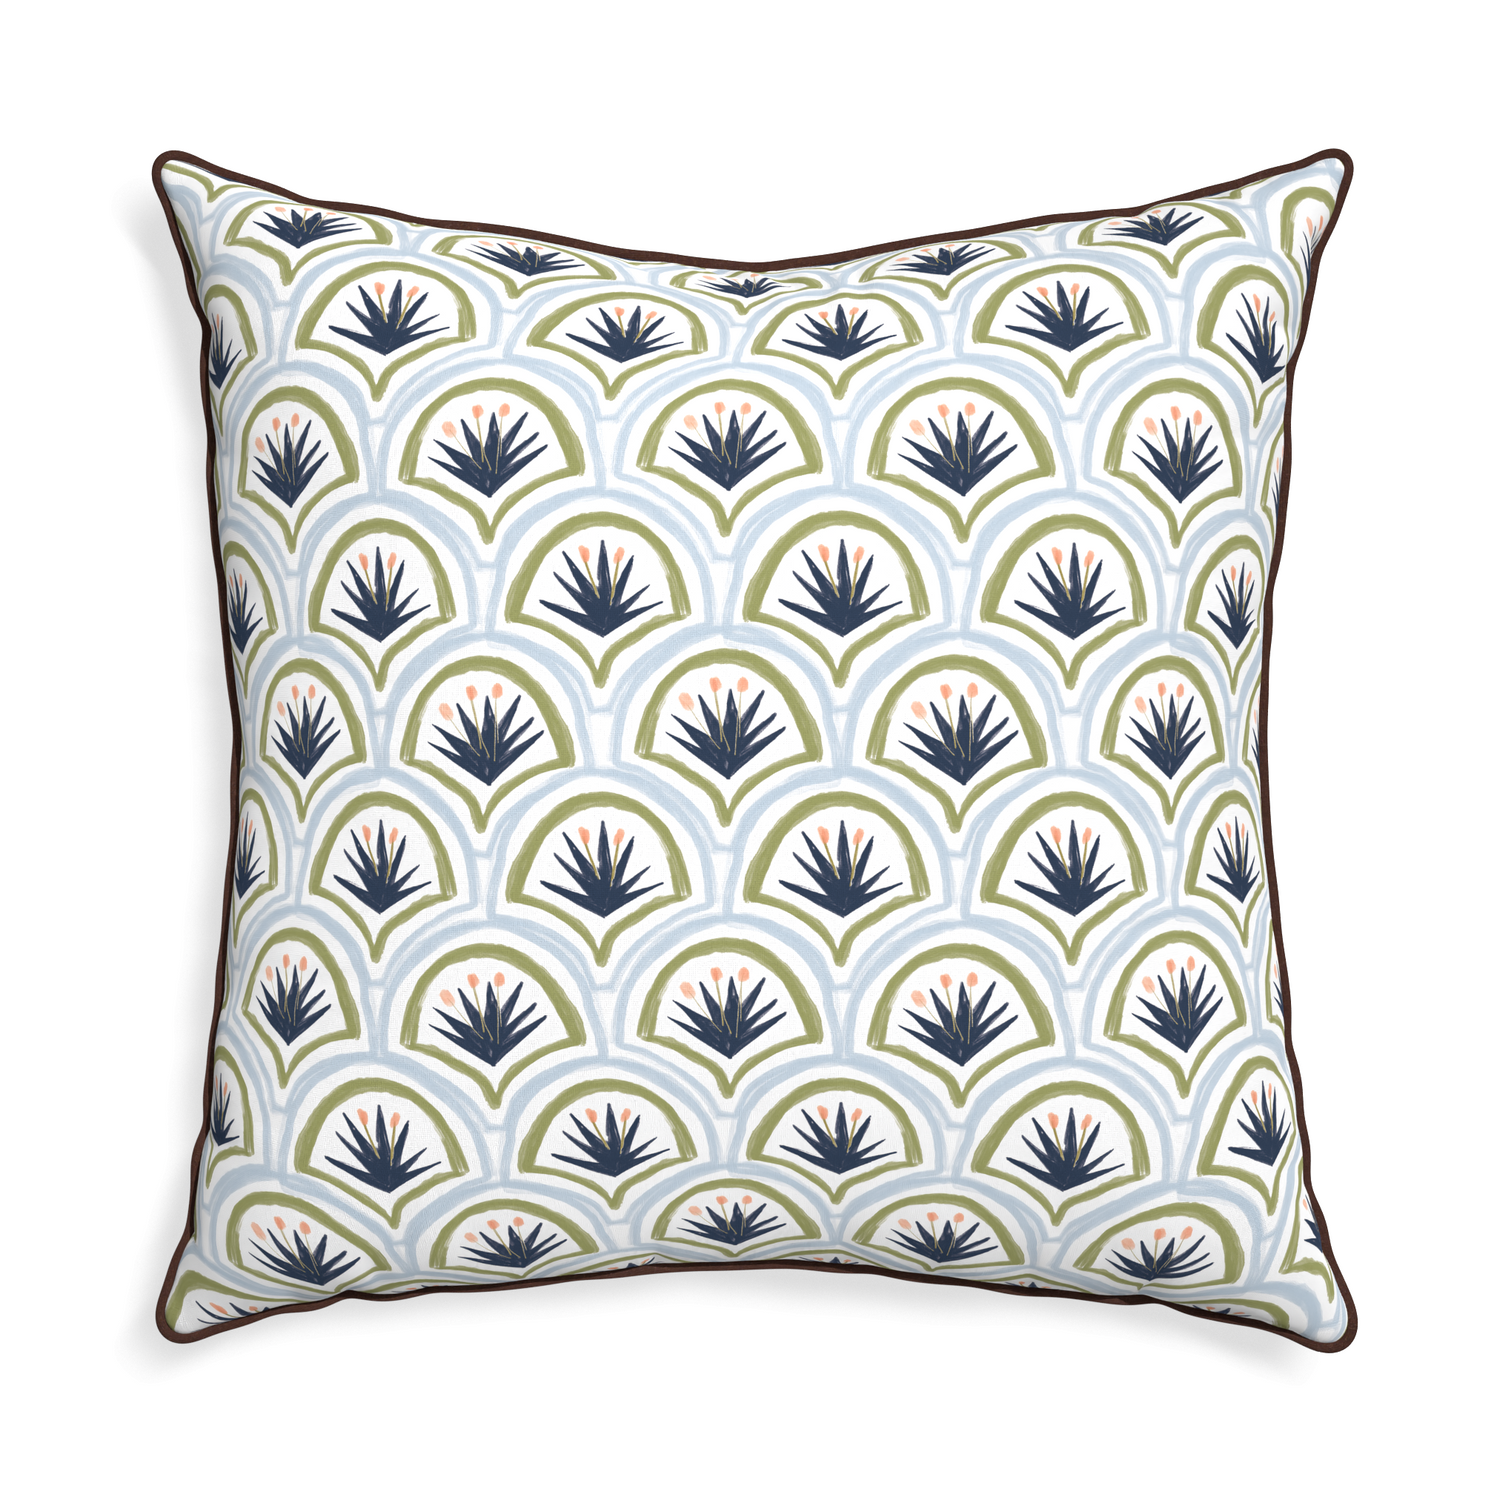 Euro-sham thatcher midnight custom art deco palm patternpillow with w piping on white background